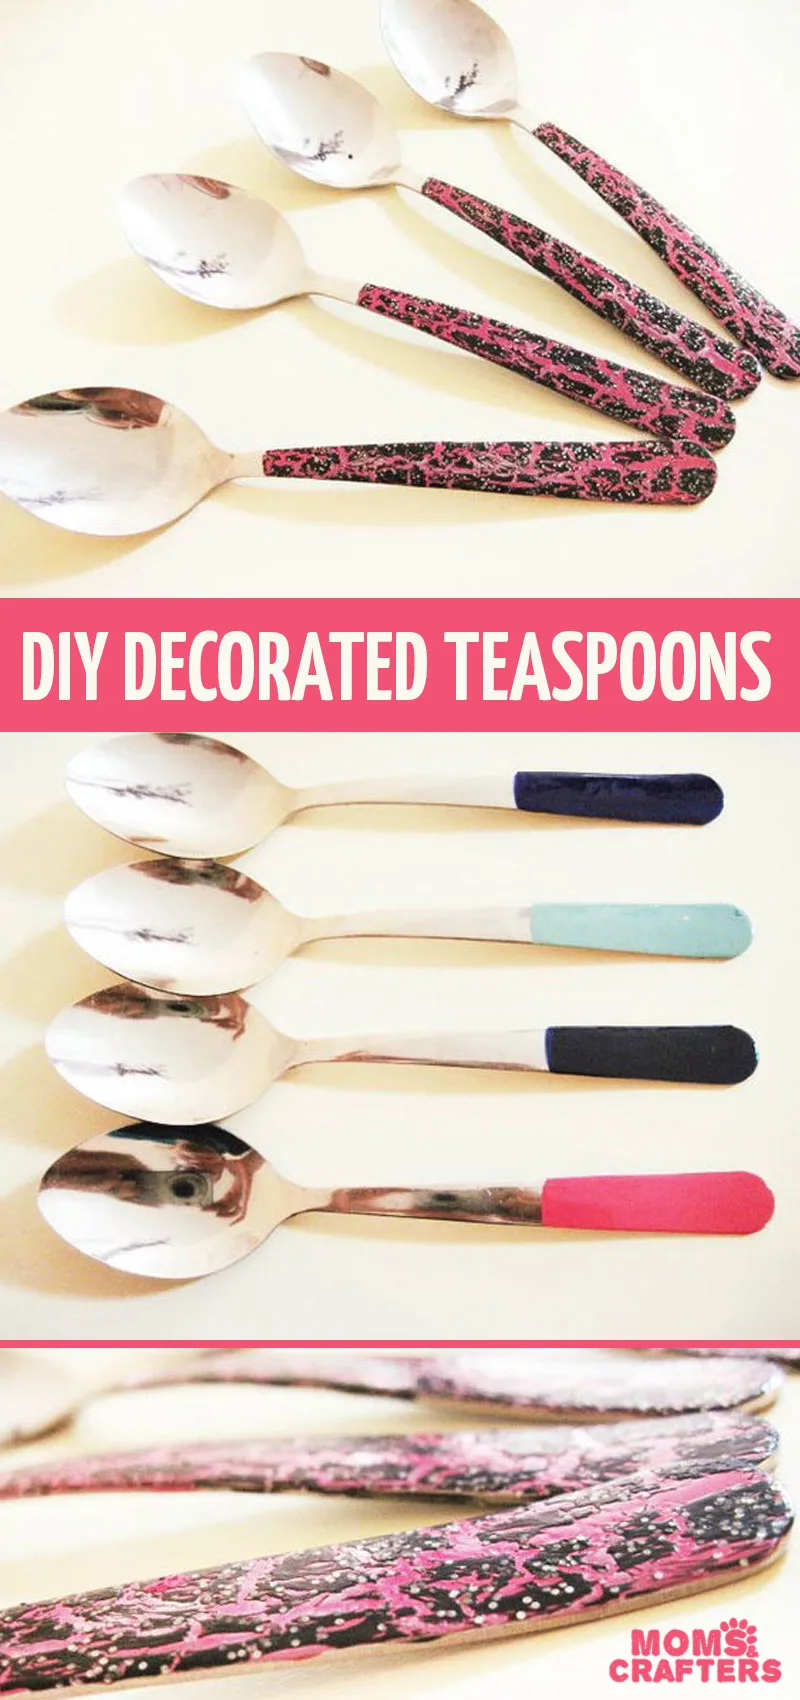 Click to see how easy it is to make your own DIY decorated spoons! These faux enamel teaspoons are so simple to make and are a beautiful functional nail polish craft for teens, tweens, and adults. #nailpolish #easycrafts #lifehacks